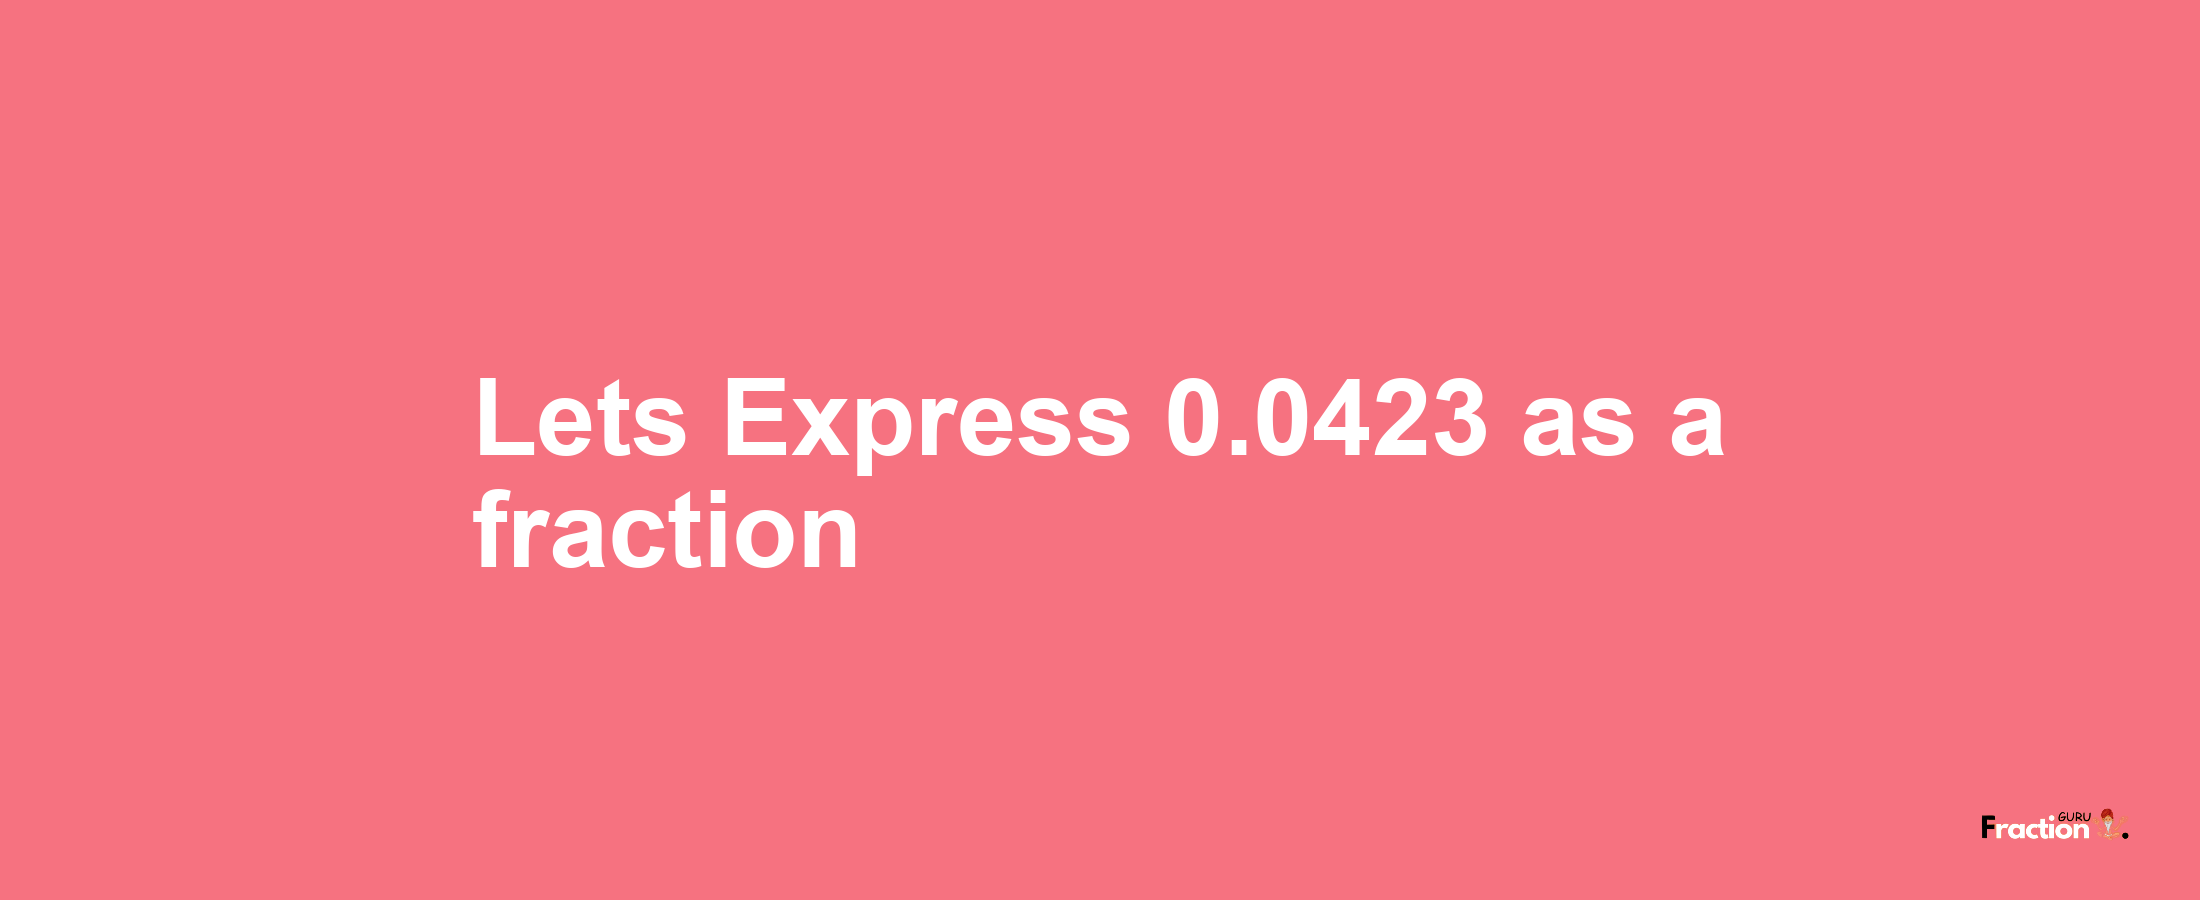 Lets Express 0.0423 as afraction